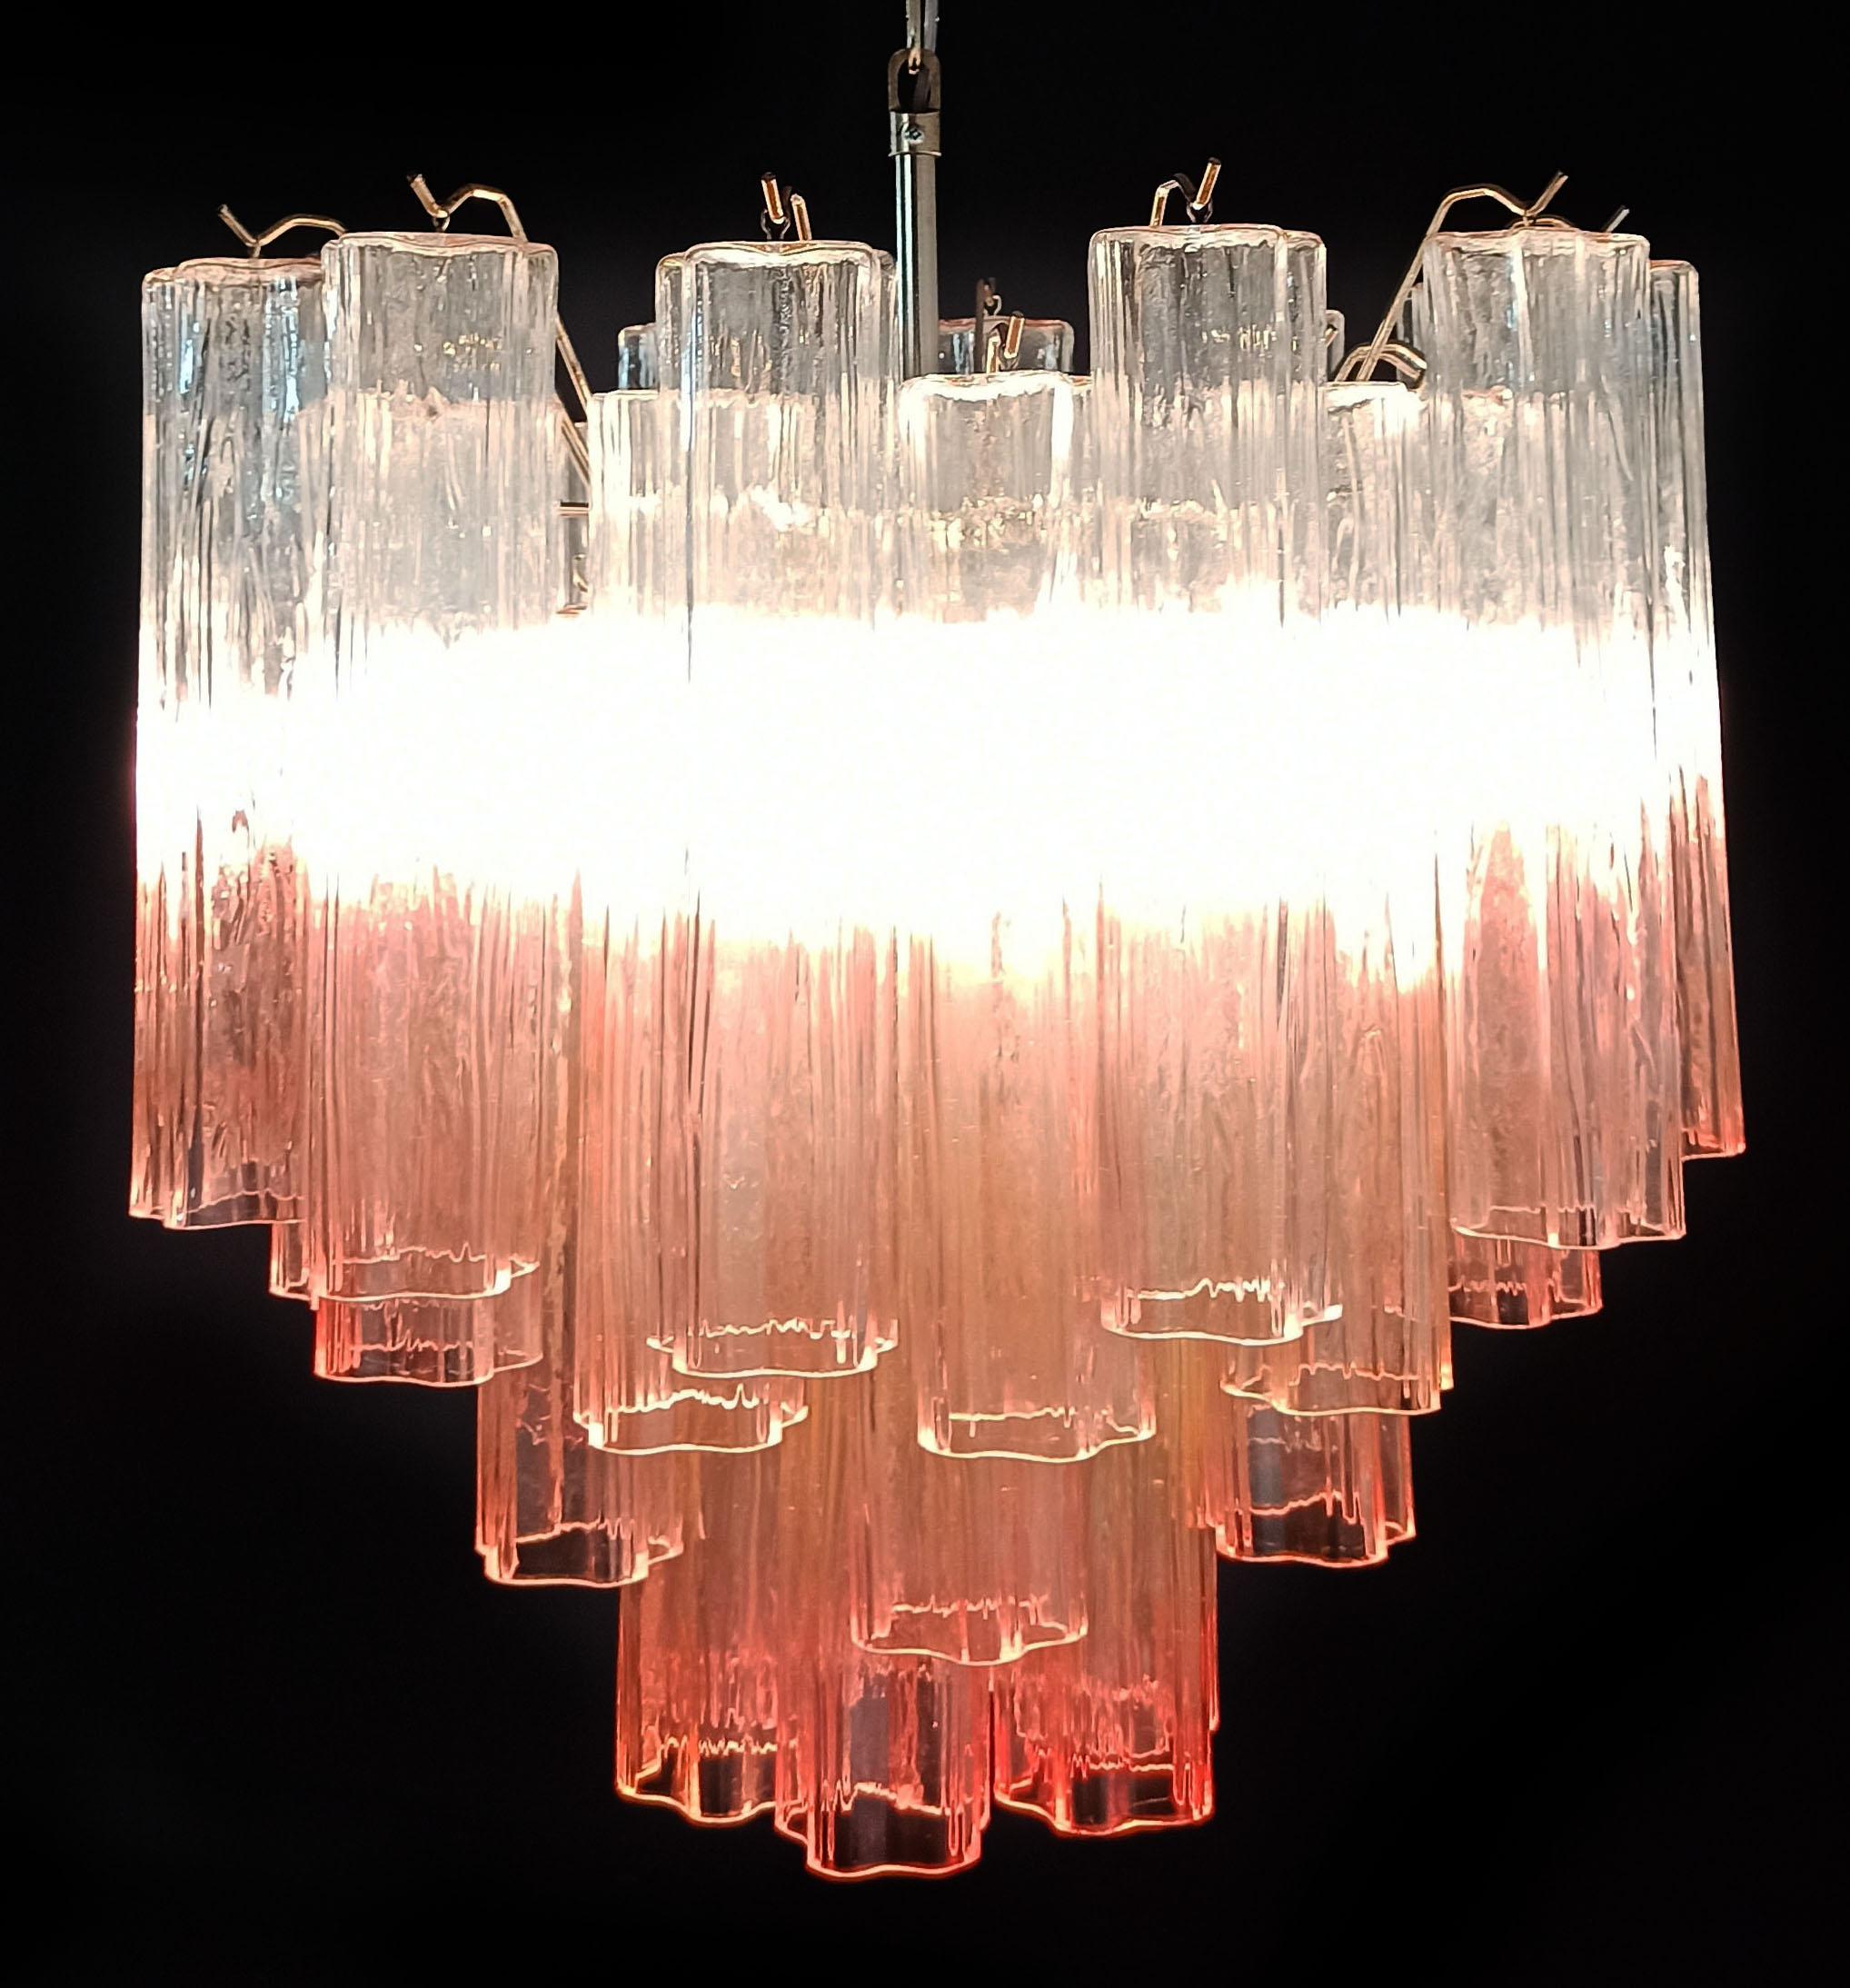 Italian vintage chandelier in Murano glass and nickel-plated metal structure. The armor polished nickel supports 36 large shaded pink glass tubes in a star shape.
Period:late XX century
Dimensions: 50,40 inches (128 cm) height with chain; 21,30